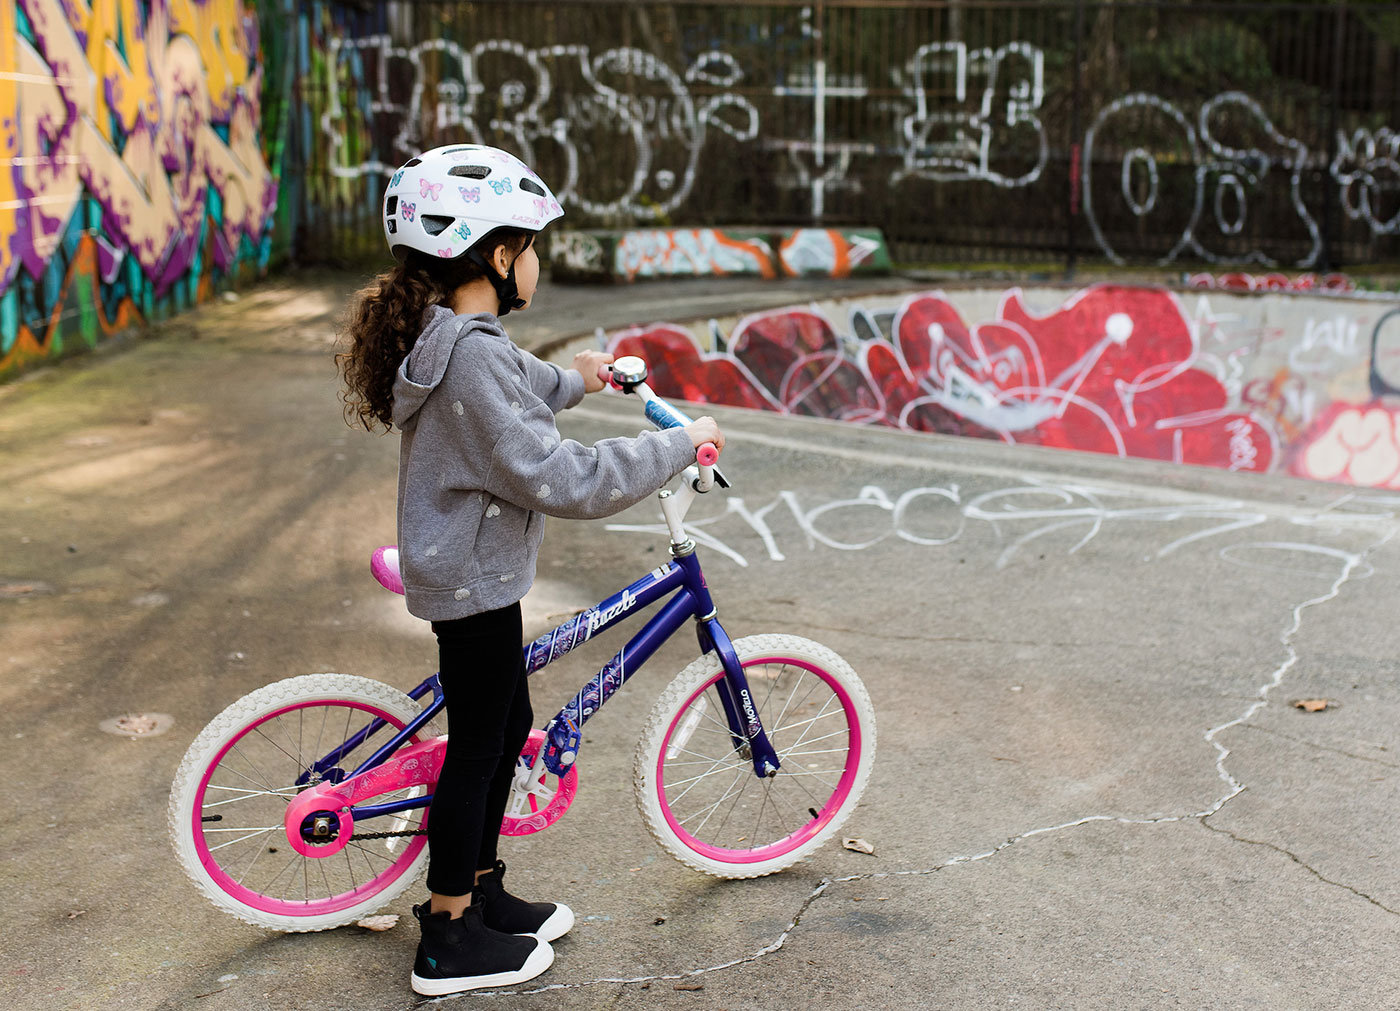 Kids Bike Accessories for Safety and Fun